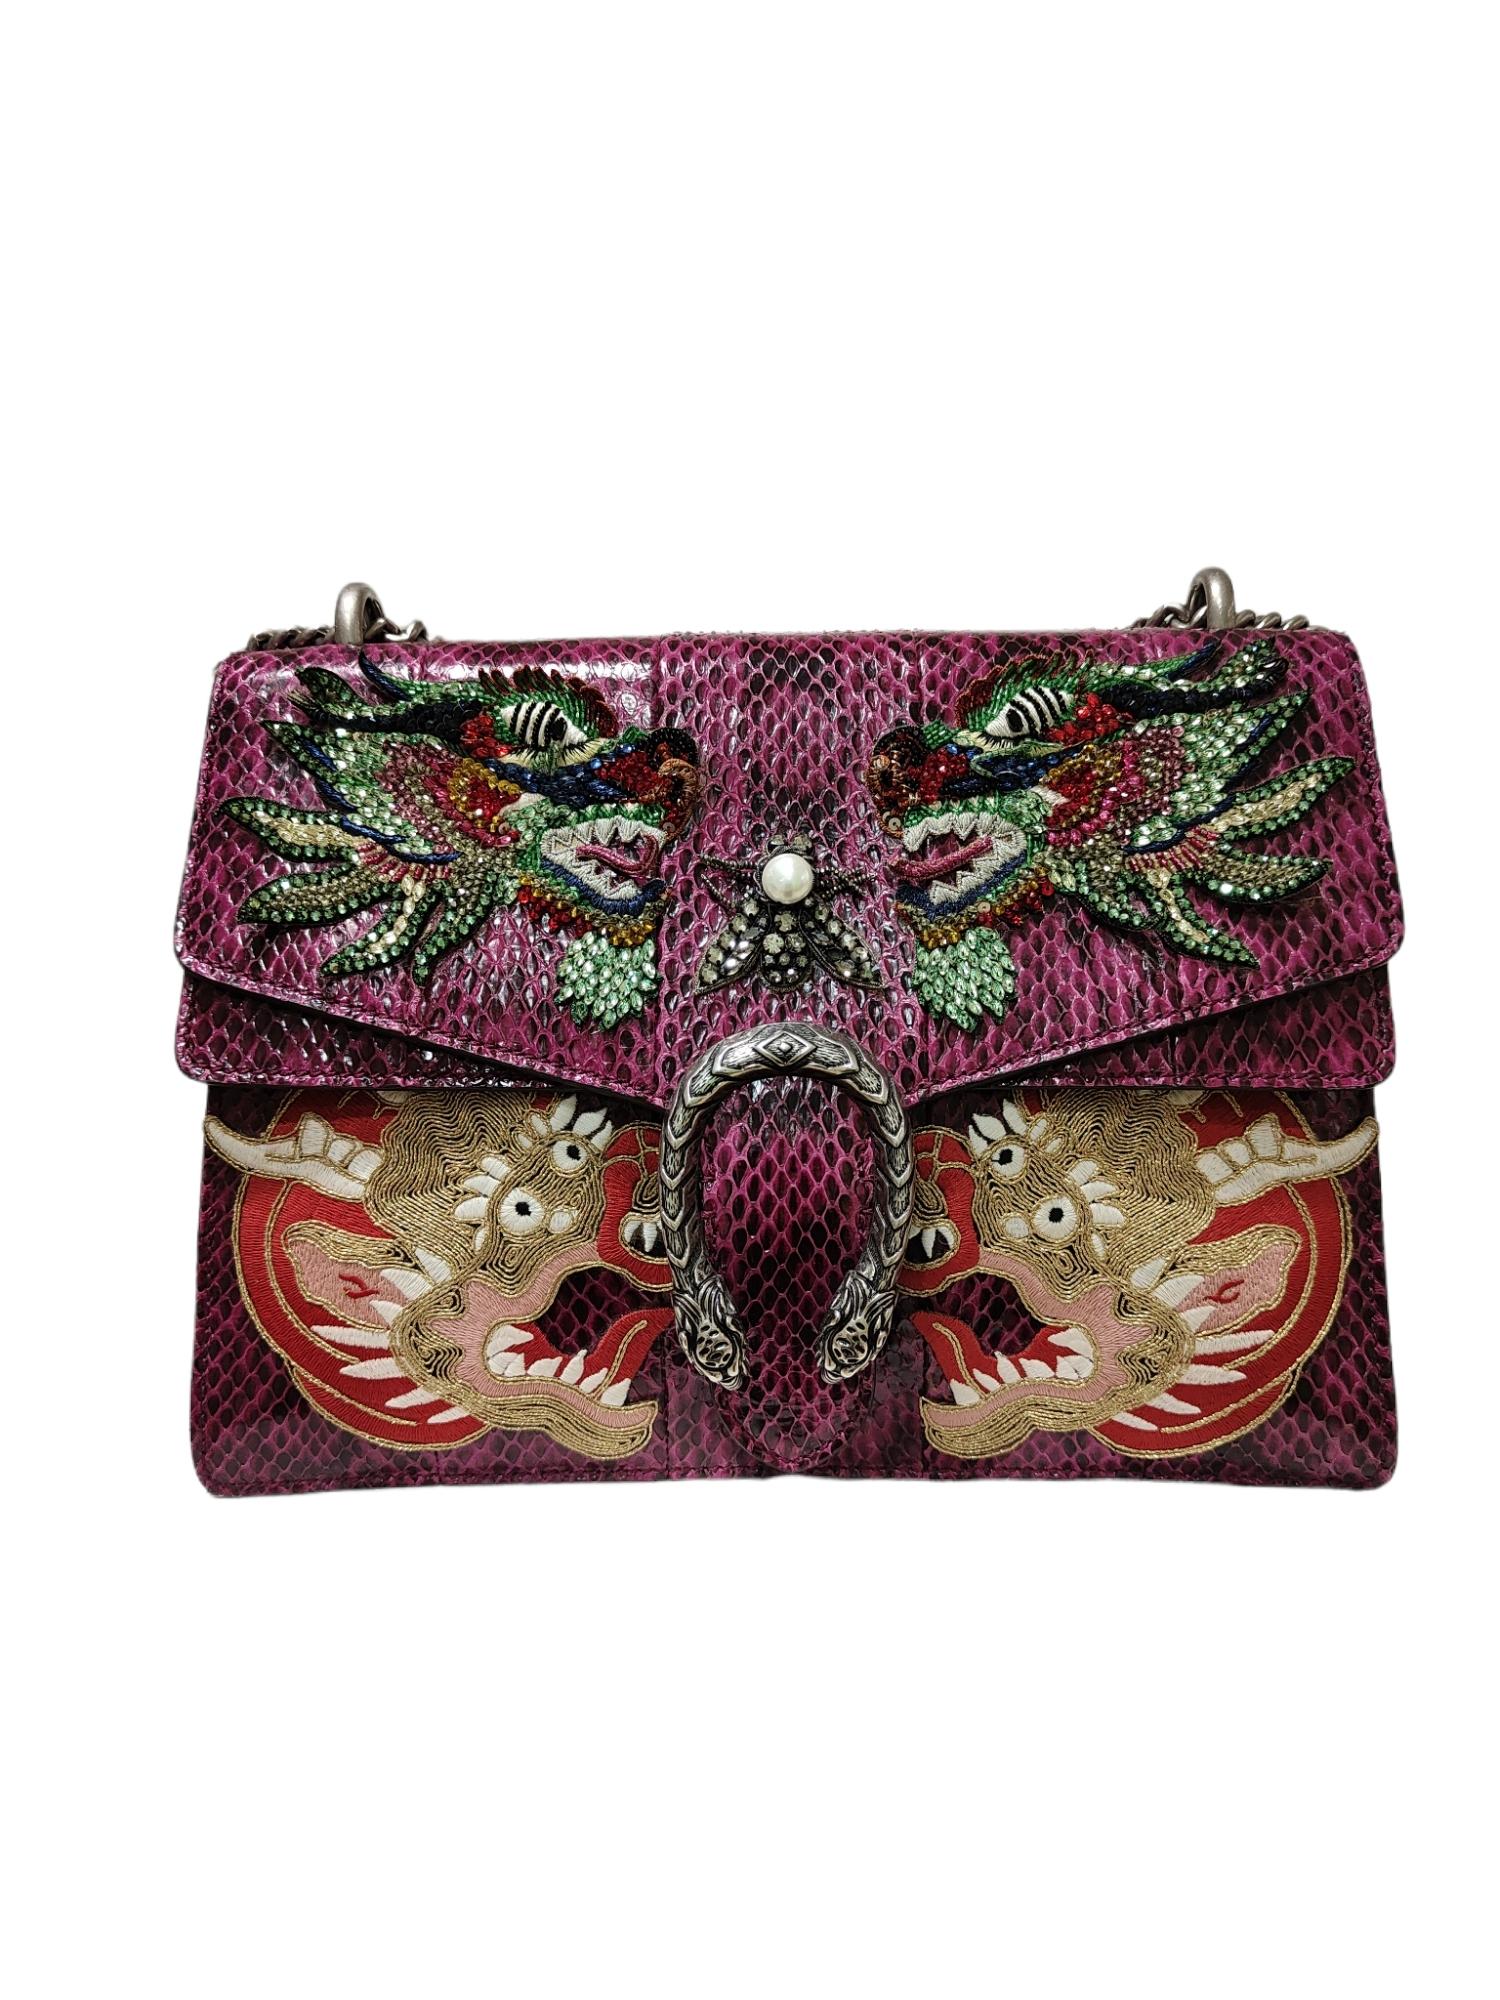 Gucci Limited Edition python skin Dionysus shoulder bag
perfect conditions
embellished with patterns, swarovski and faux pearl
29,5*21 cm, 10 cm depth
